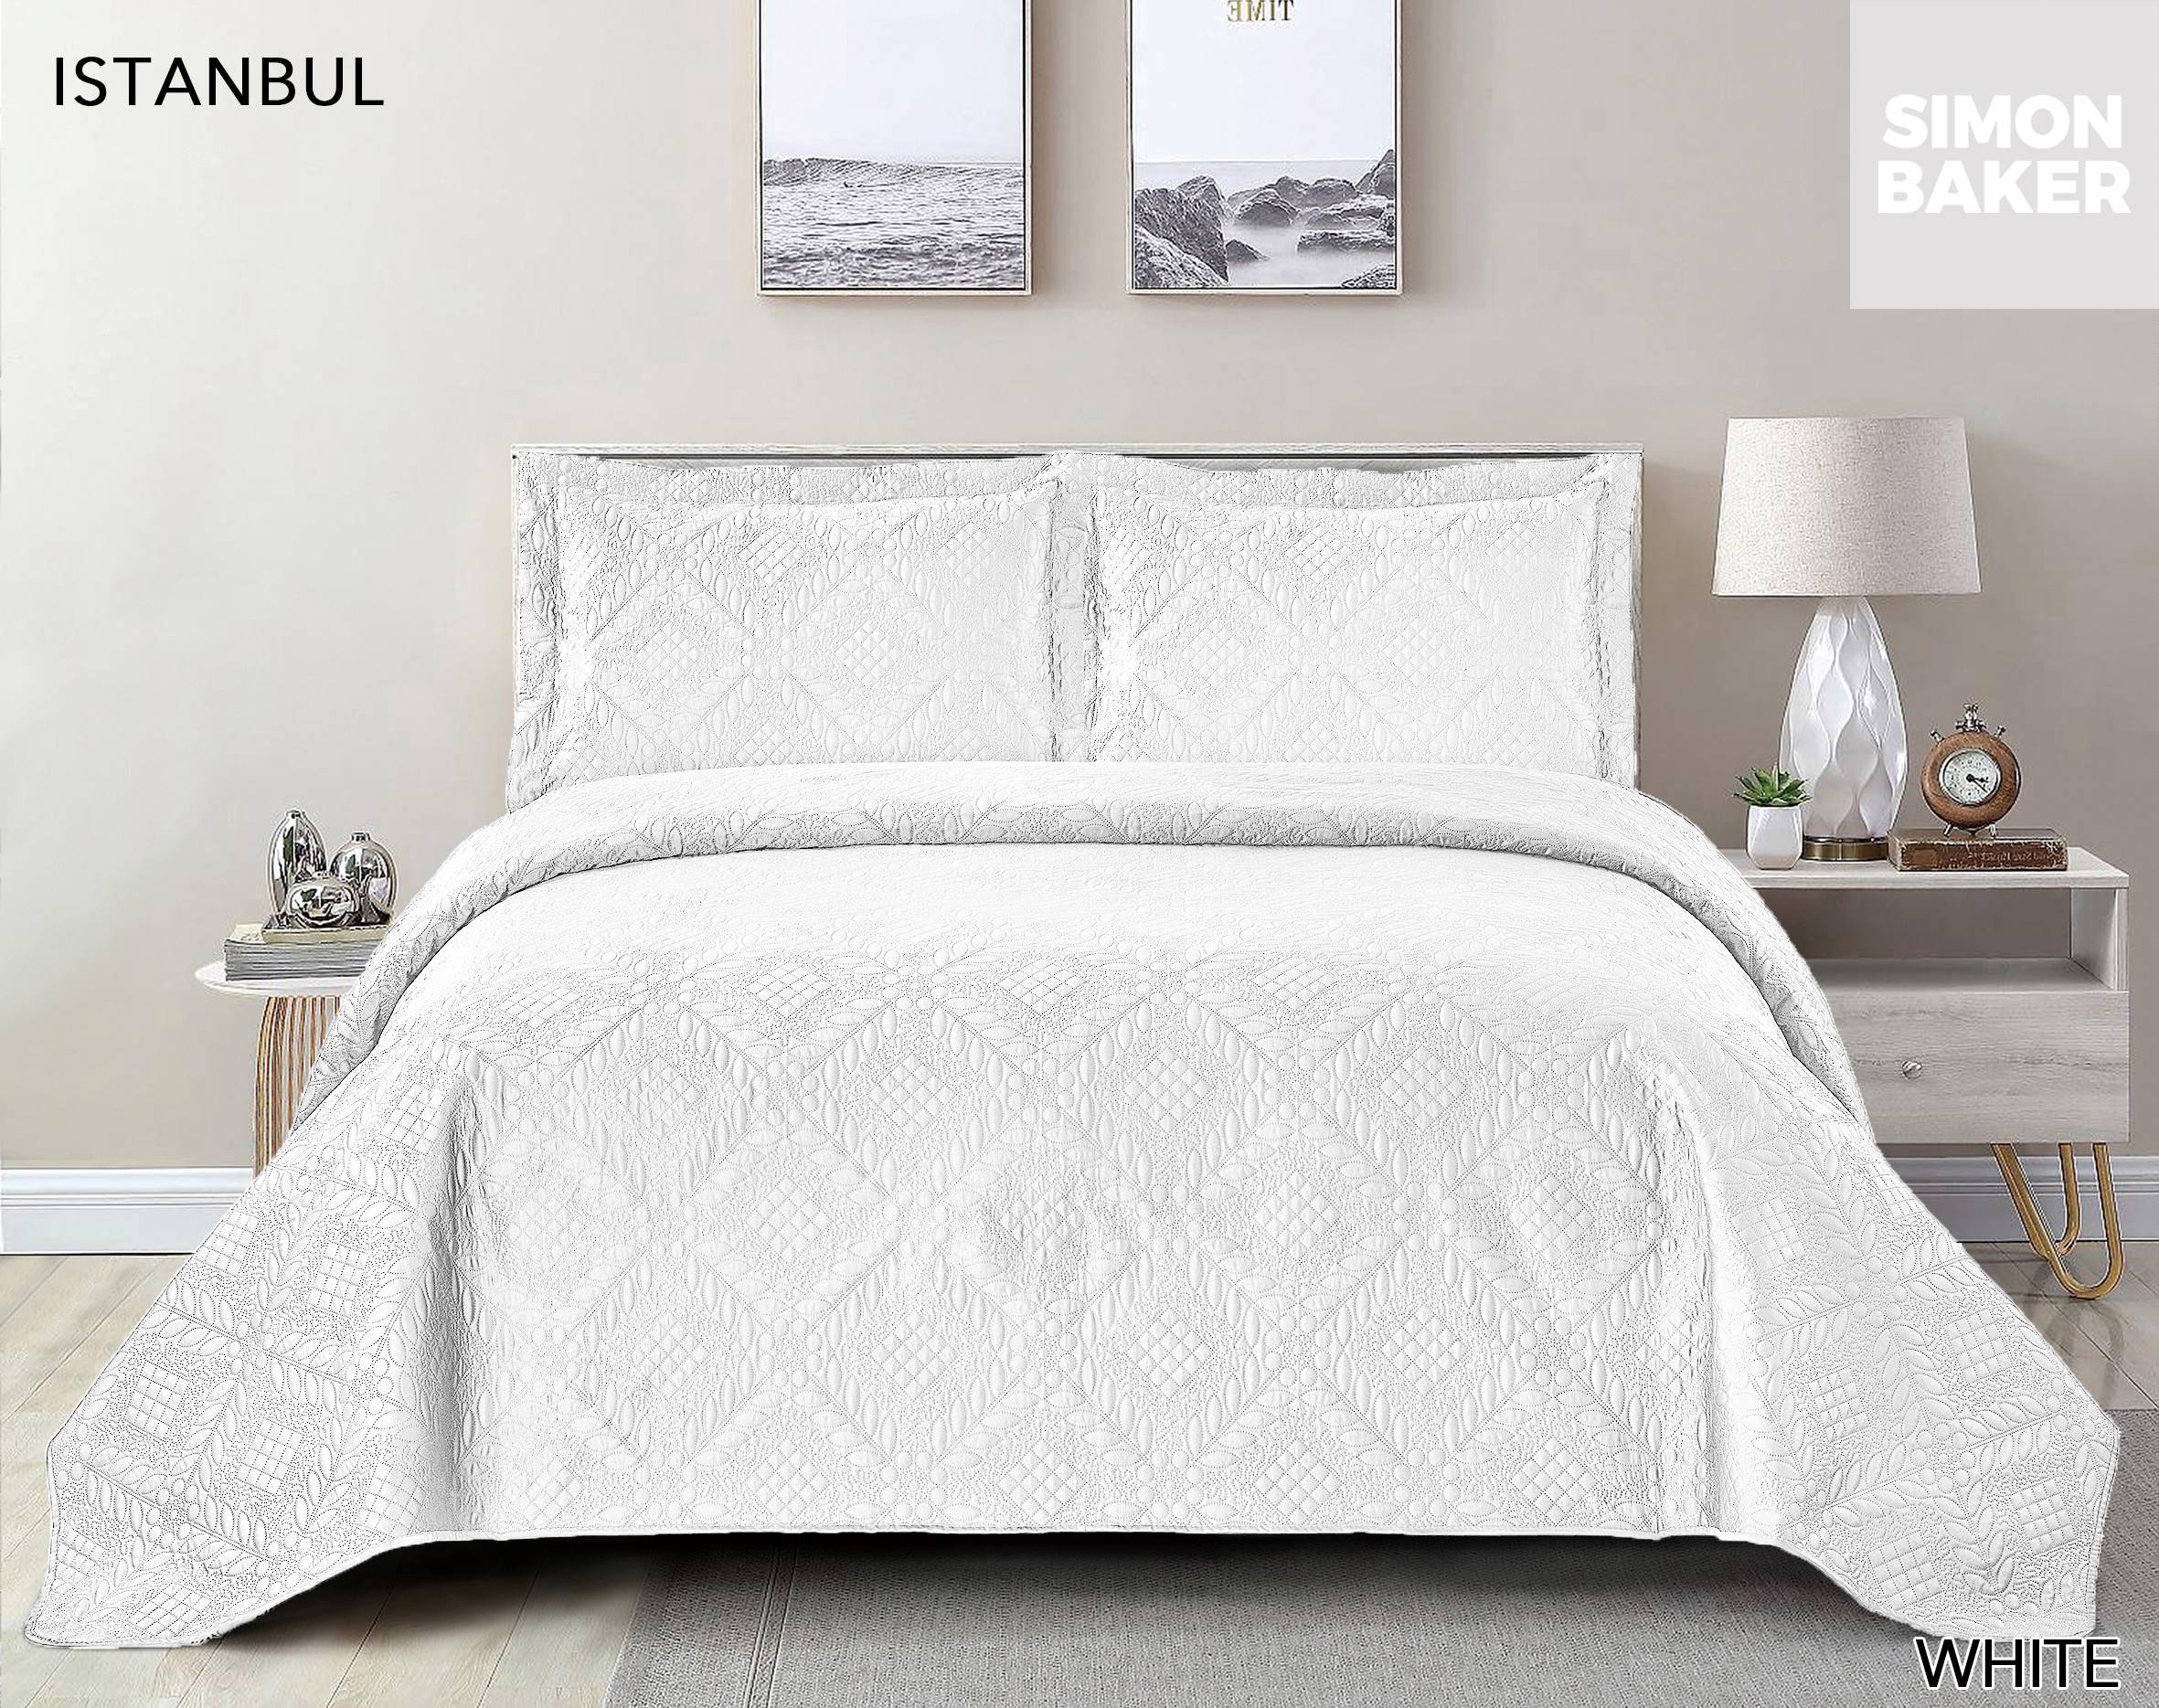 Istanbul Pin-Quilt Bedspread